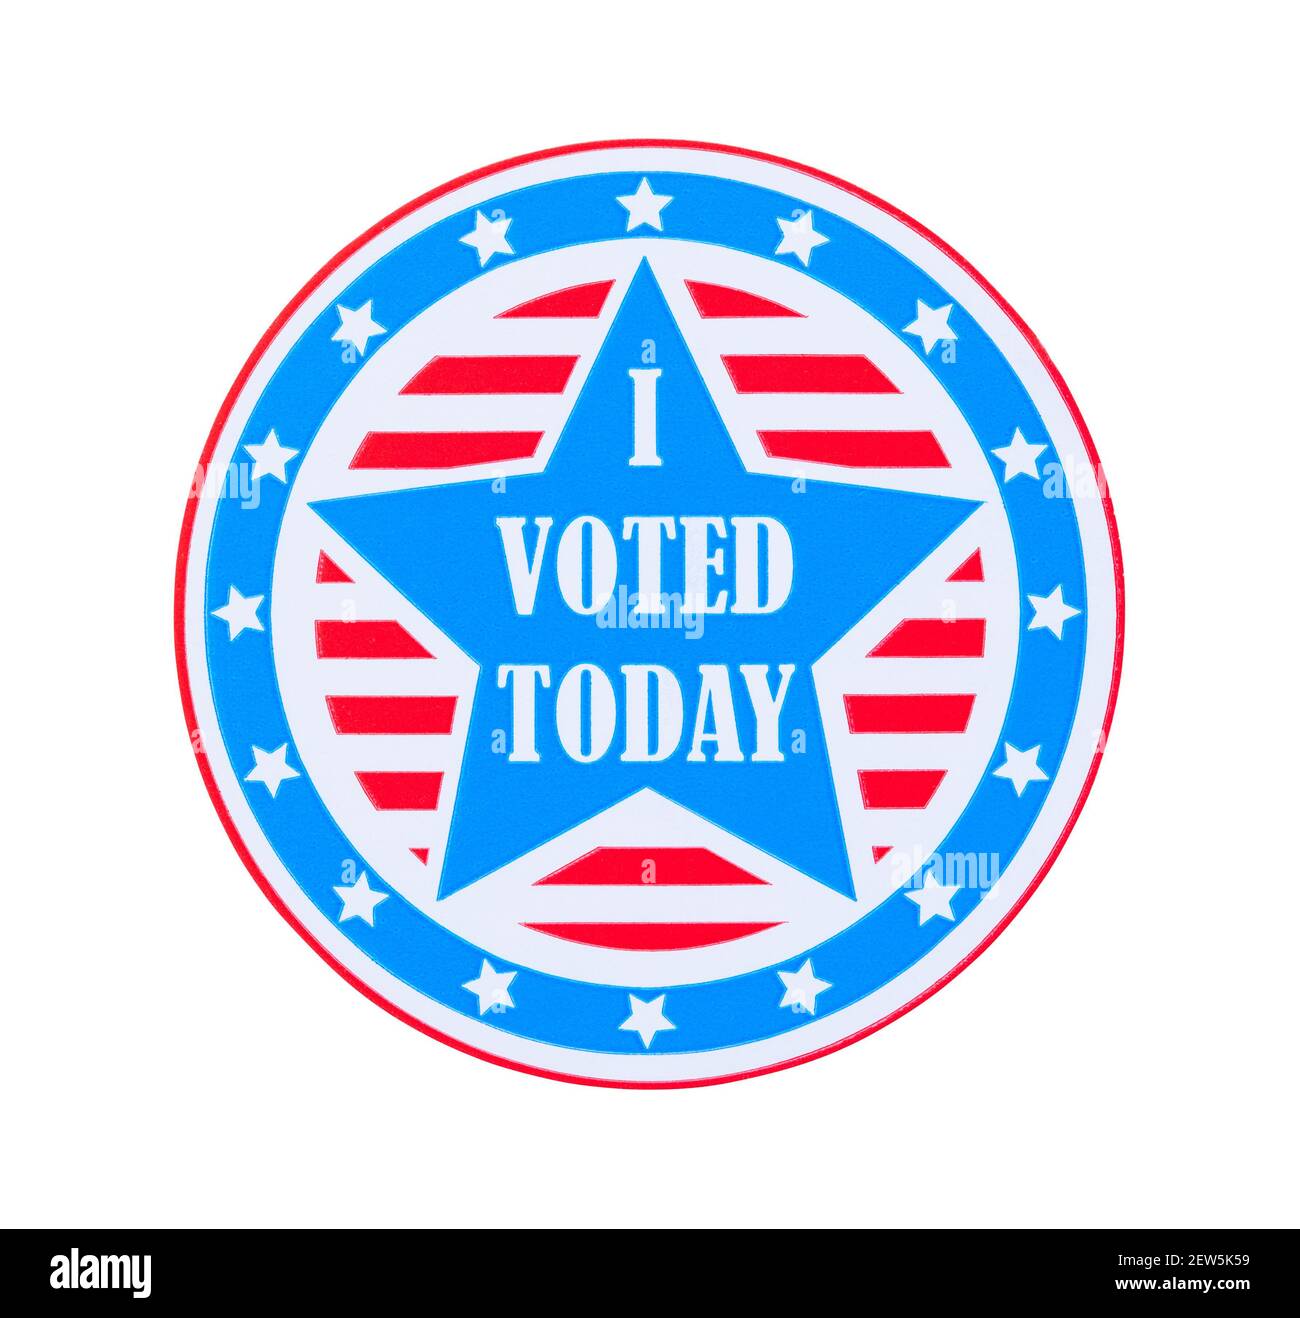 I Voted Today Round Sticker Cut Out. Stock Photo